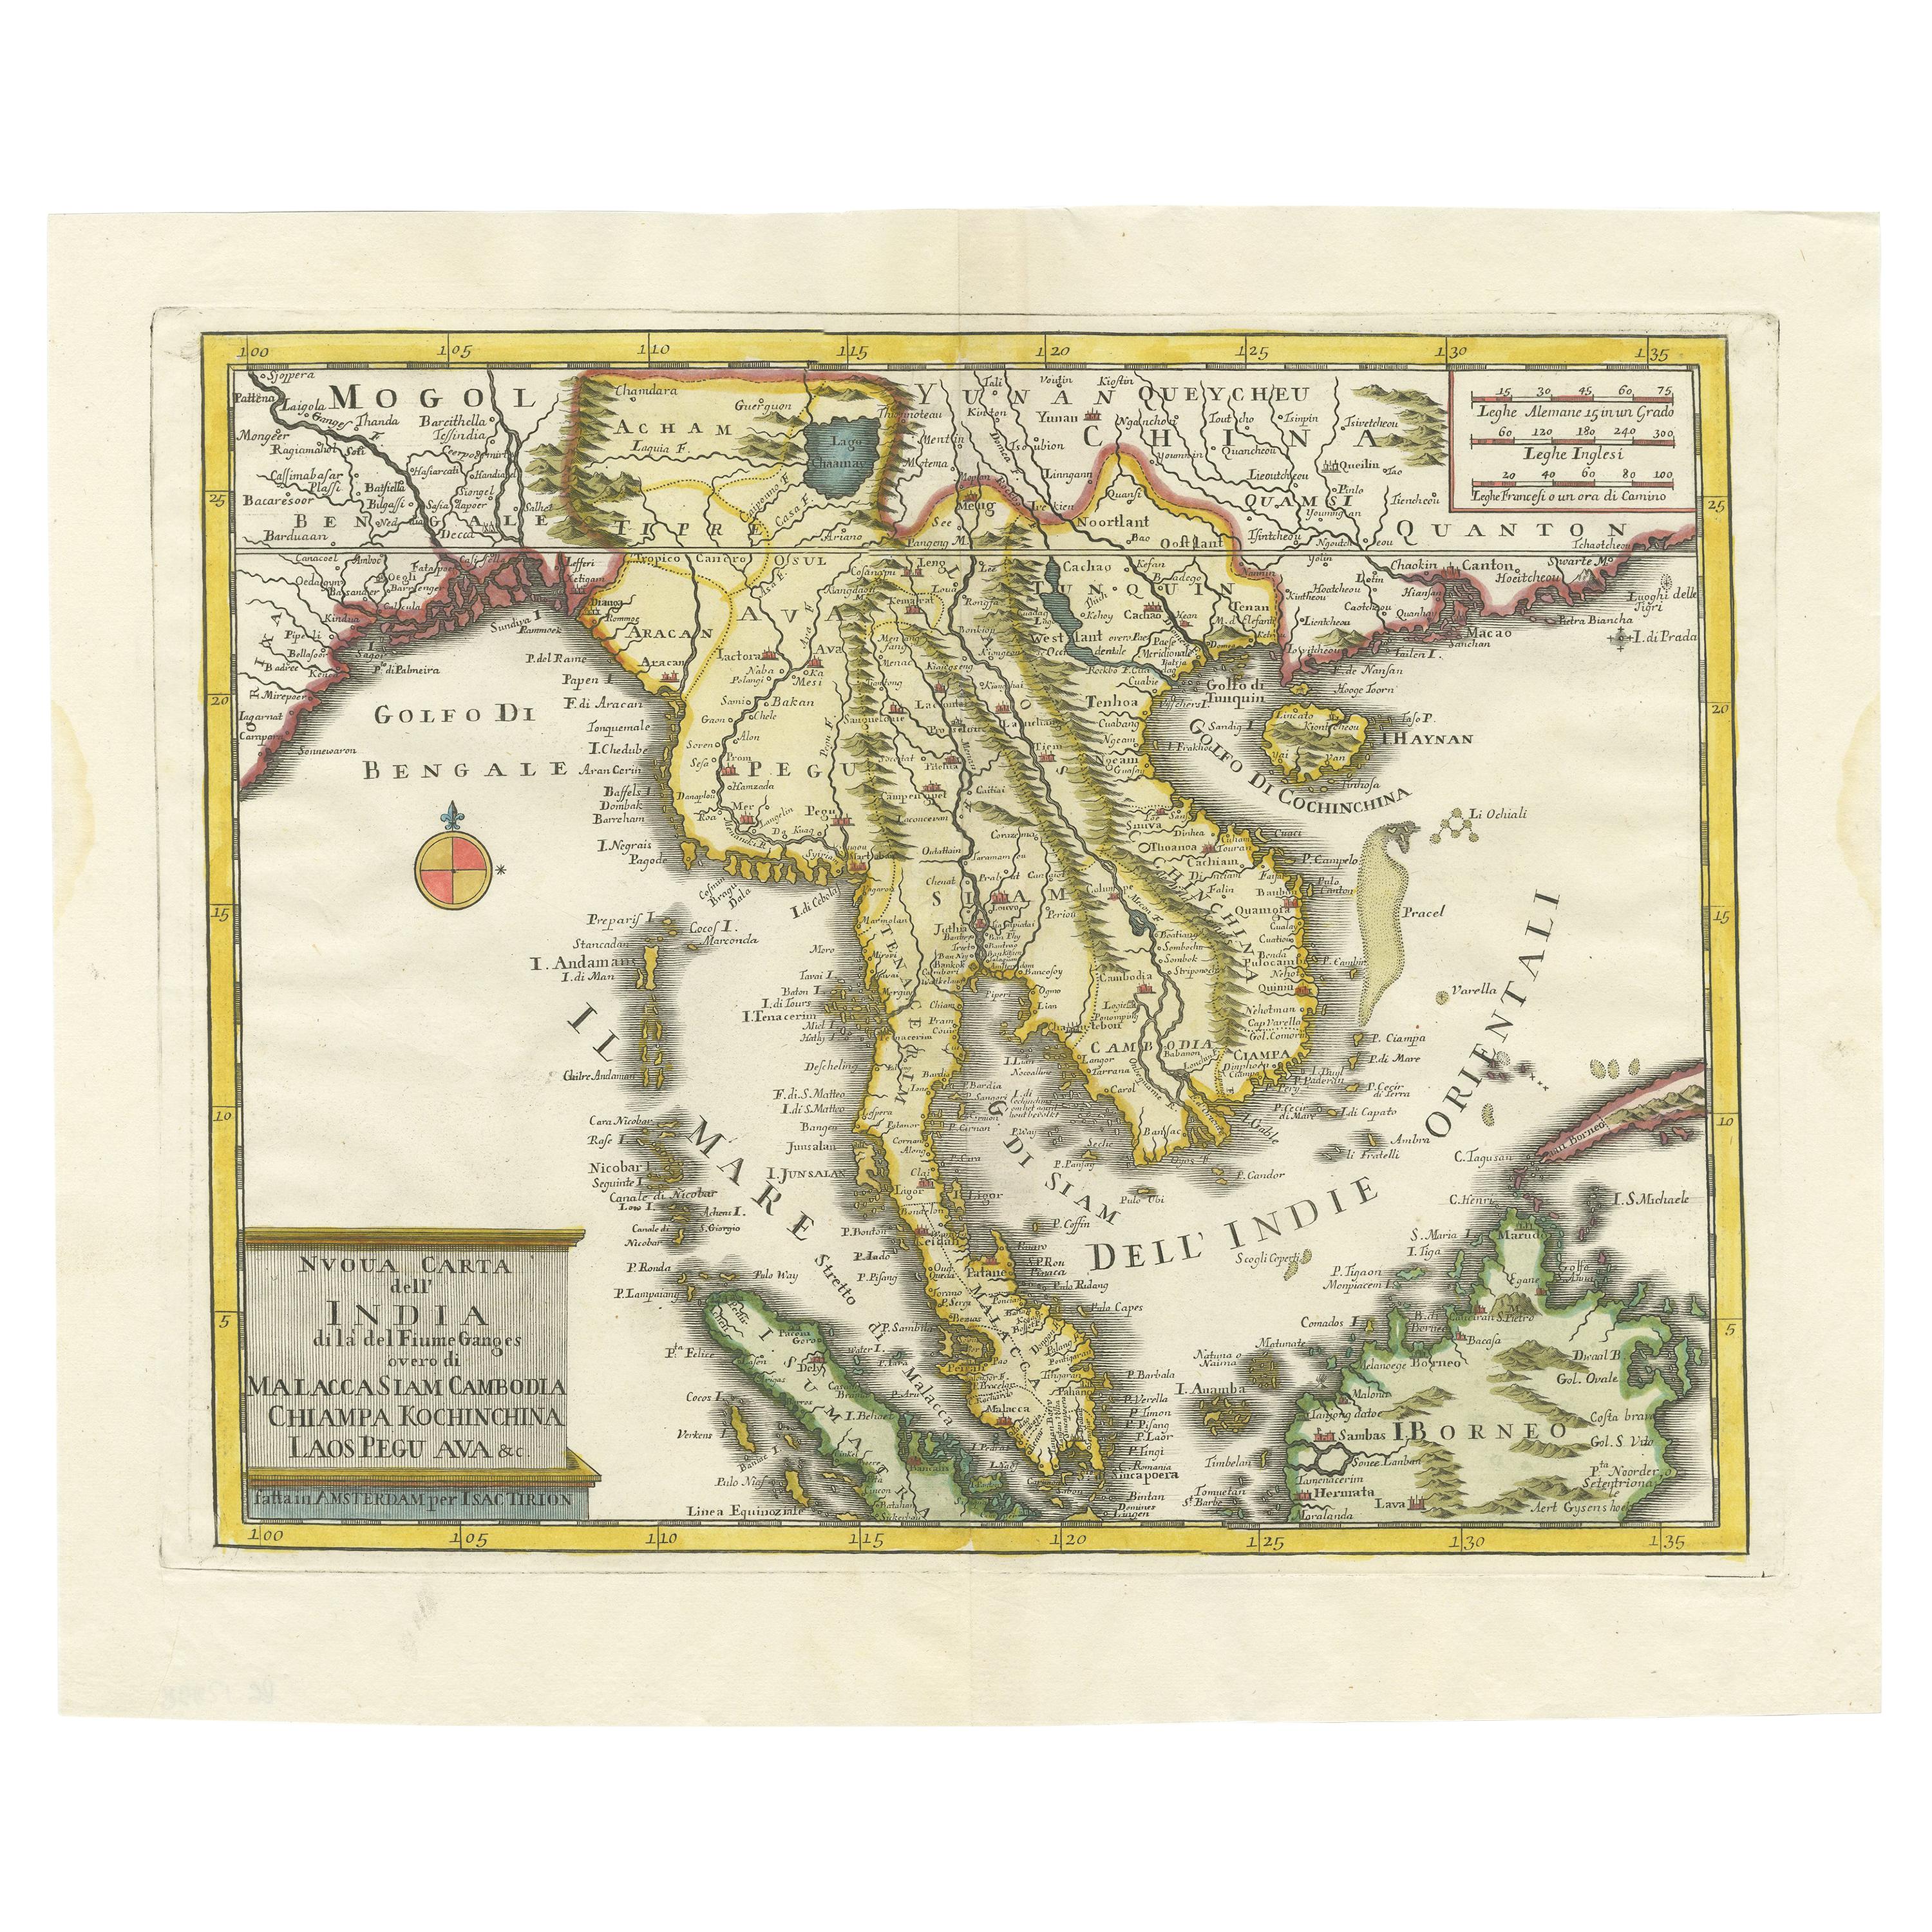 Antique Map of the Region Centered on the Malay Peninsula by Tirion 'c.1760'